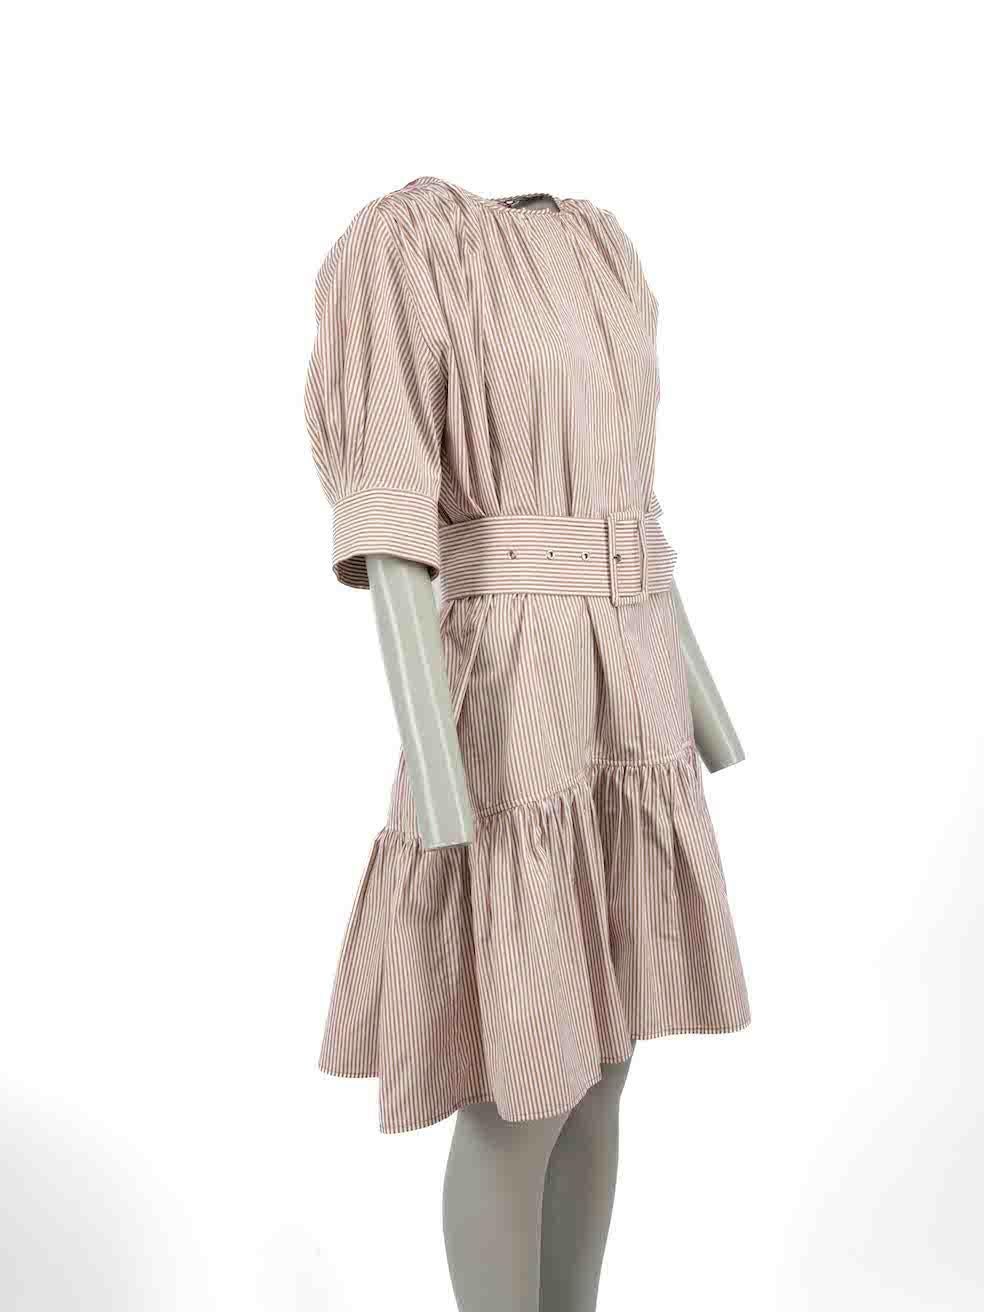 CONDITION is Very good. Hardly any visible wear to dress is evident on this used Chlo√© designer resale item. Belt is included.
  
Details
Brown
Cotton
Dress
White striped pattern
3/4 Length sleeves
Gathered cuff and hem
Round neck
Cut out shoulder